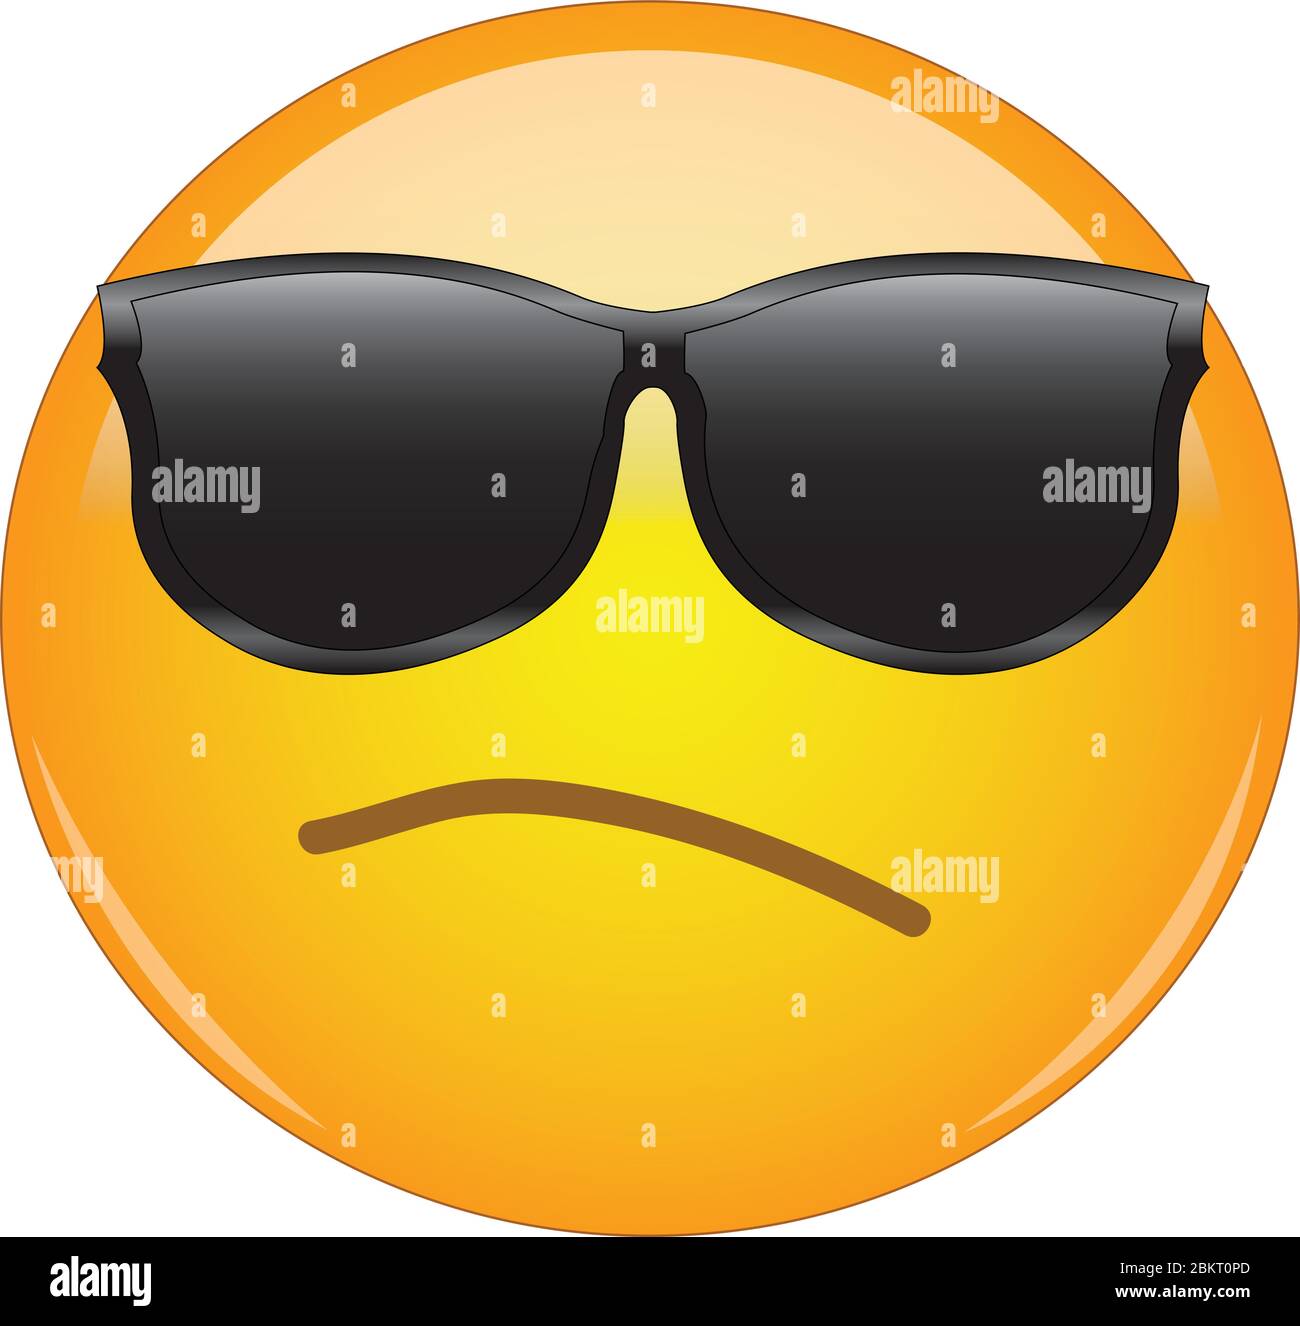 Awesome snobbish and arrogant emoji wearing sunglasses. Yellow face emoticon wearing shades and having small, intent frown as a sign of arrogance and Stock Vector